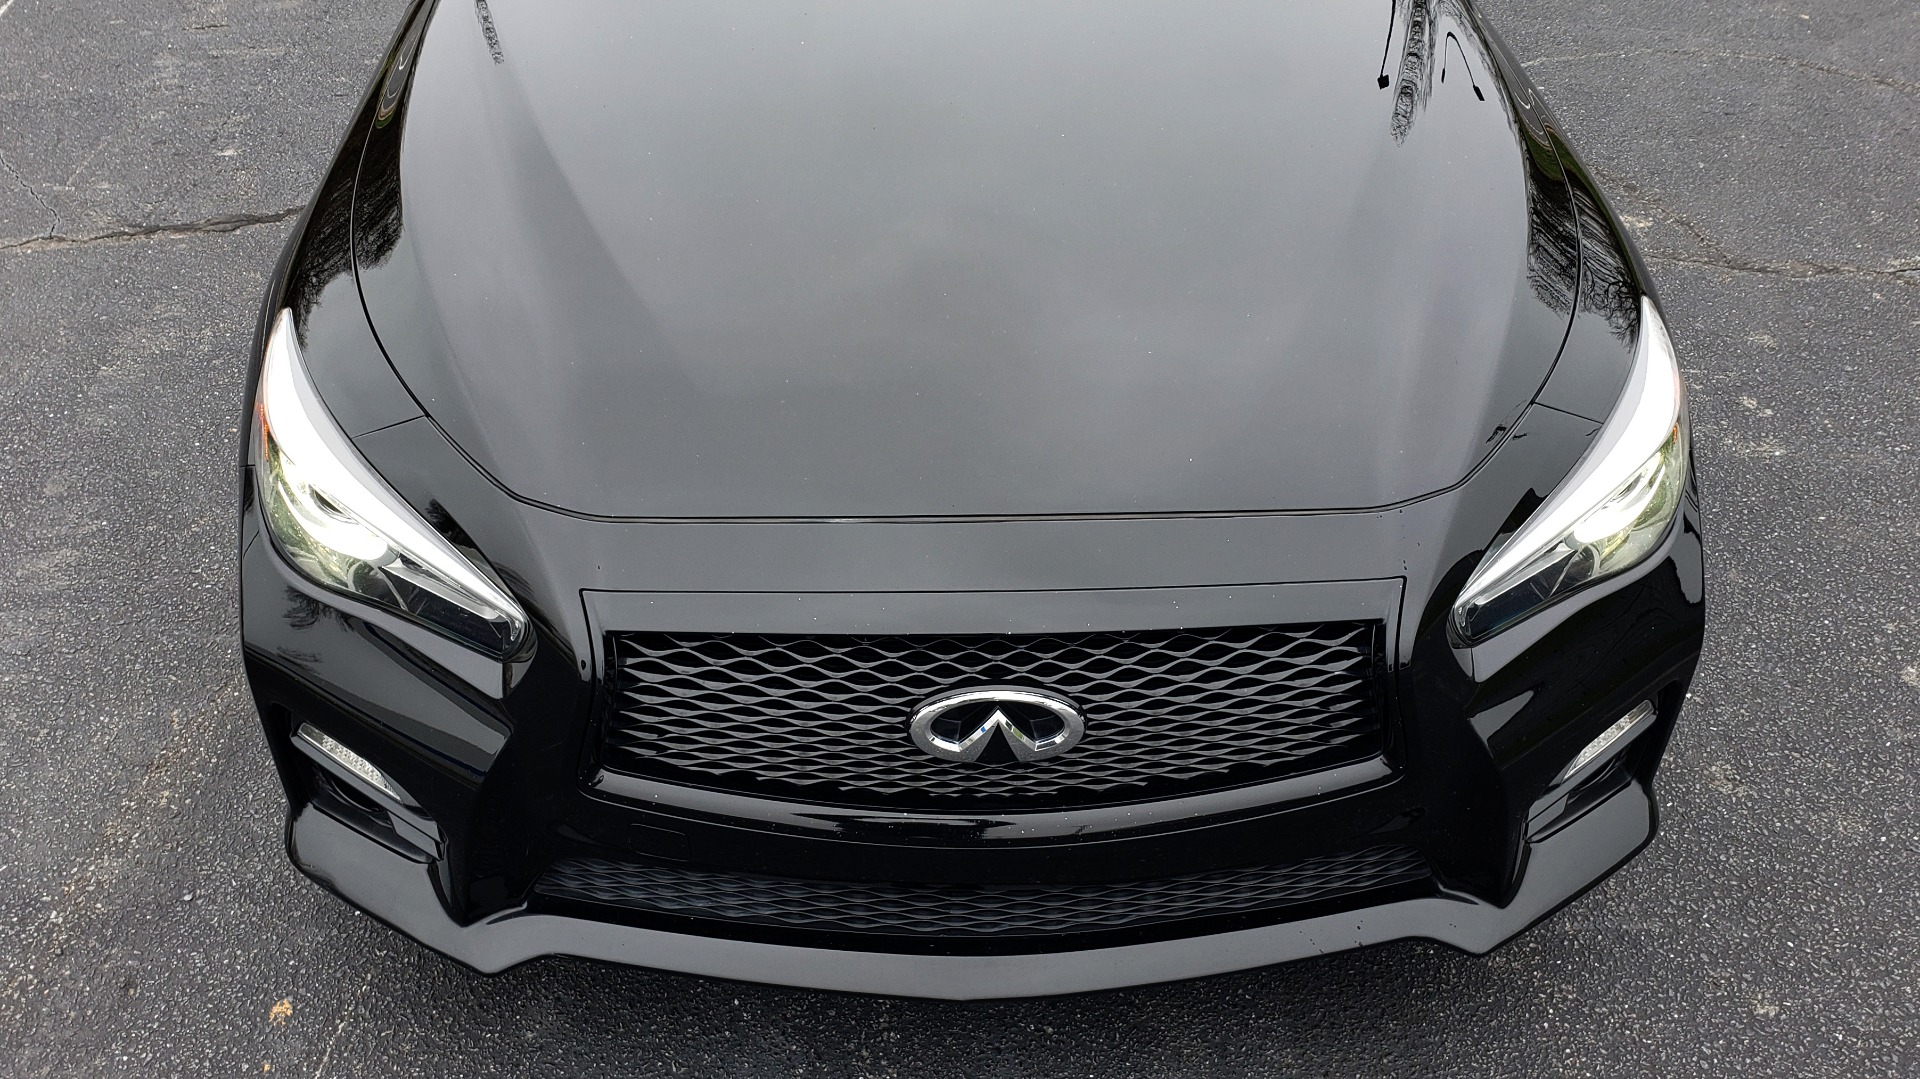 Used 2016 Infiniti Q50 3.0t PREMIUM SPORT AWD / NAV / SUNROOF / HTD STS / REARVIEW for sale Sold at Formula Imports in Charlotte NC 28227 29